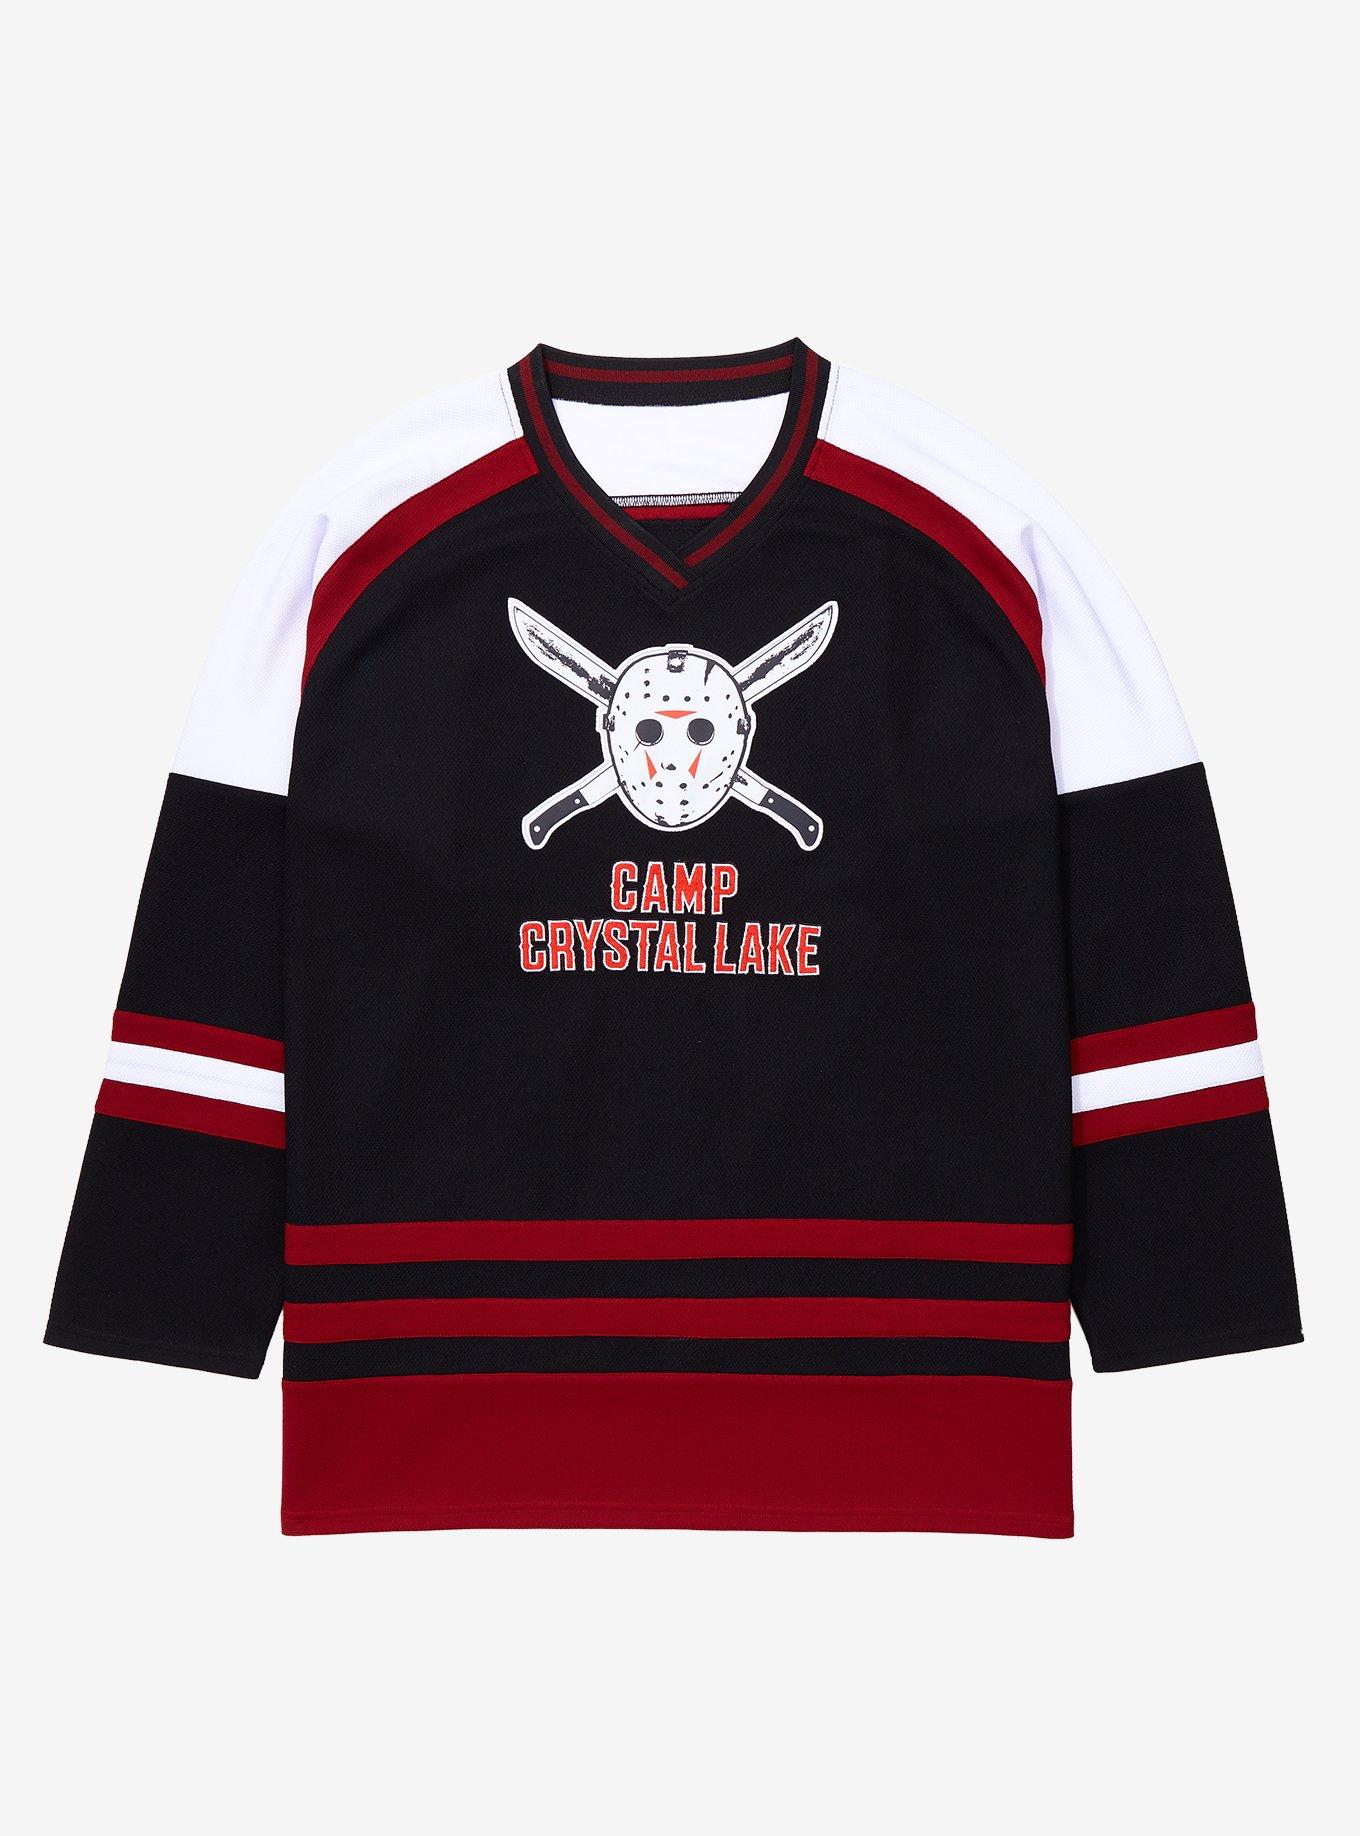  Men's Voorhees Jason Friday Movie Ice Hockey Jersey Halloween  Stitched : Clothing, Shoes & Jewelry